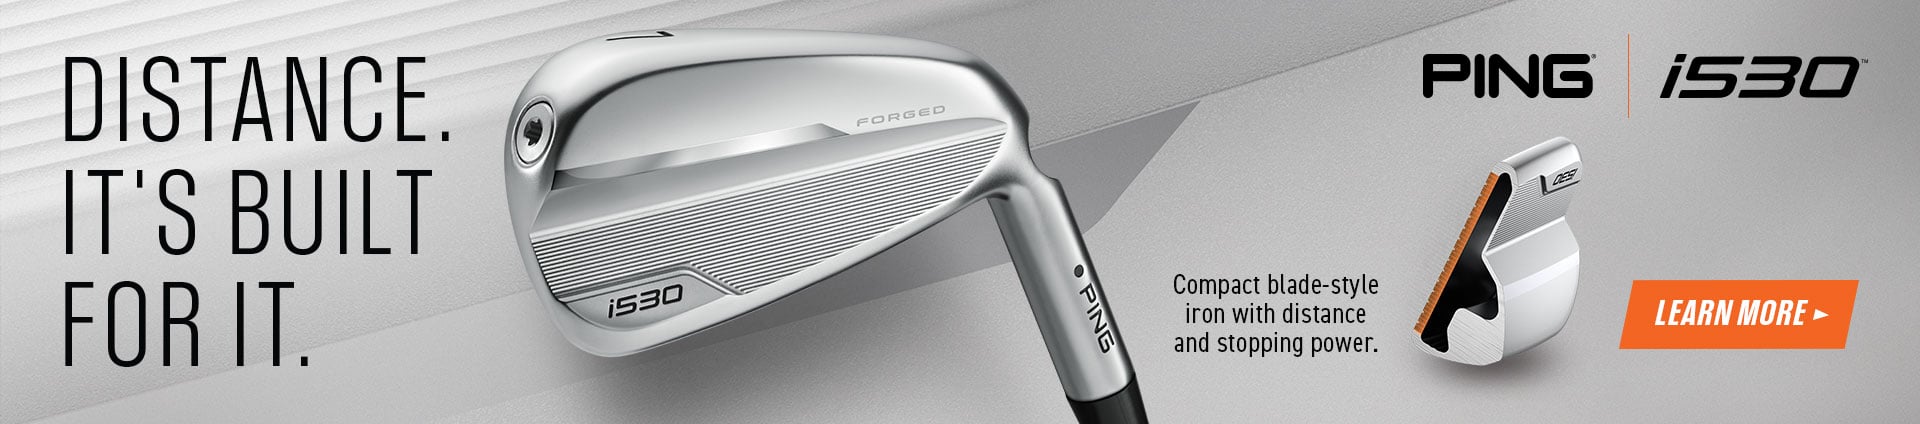 Ping i530 Irons Banner